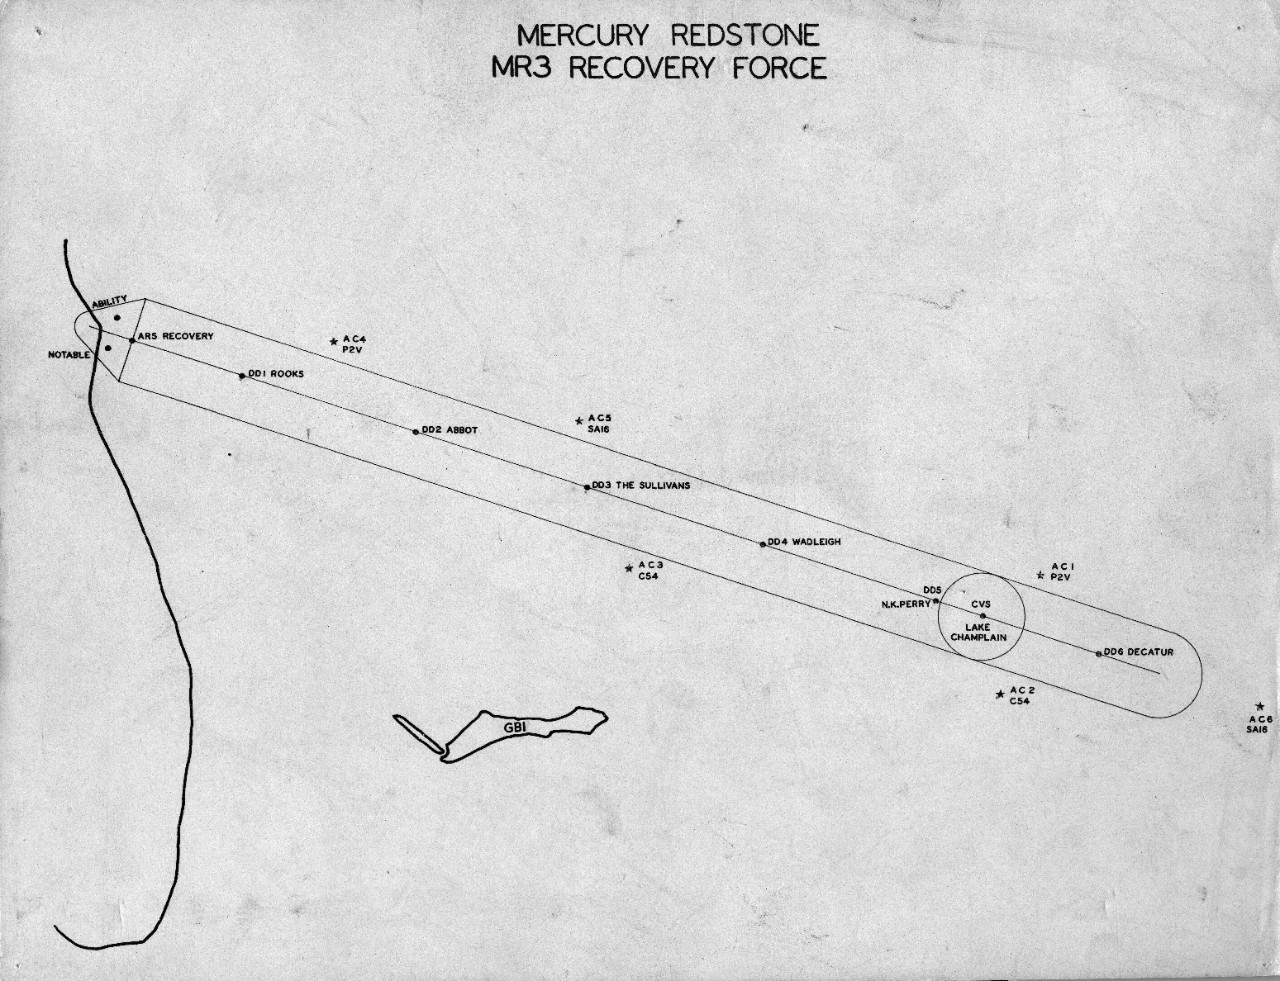 Chart showing positions of U.S. Navy recovery vessels for Mercury-Redstone 3 (MR3), the suborbital flight of Commander Alan Shepard in the capsule "Freedom 7." It is not clear if this chart shows the actual position of recovery ships during the flight, or was used for planning purposes prior to the flight.